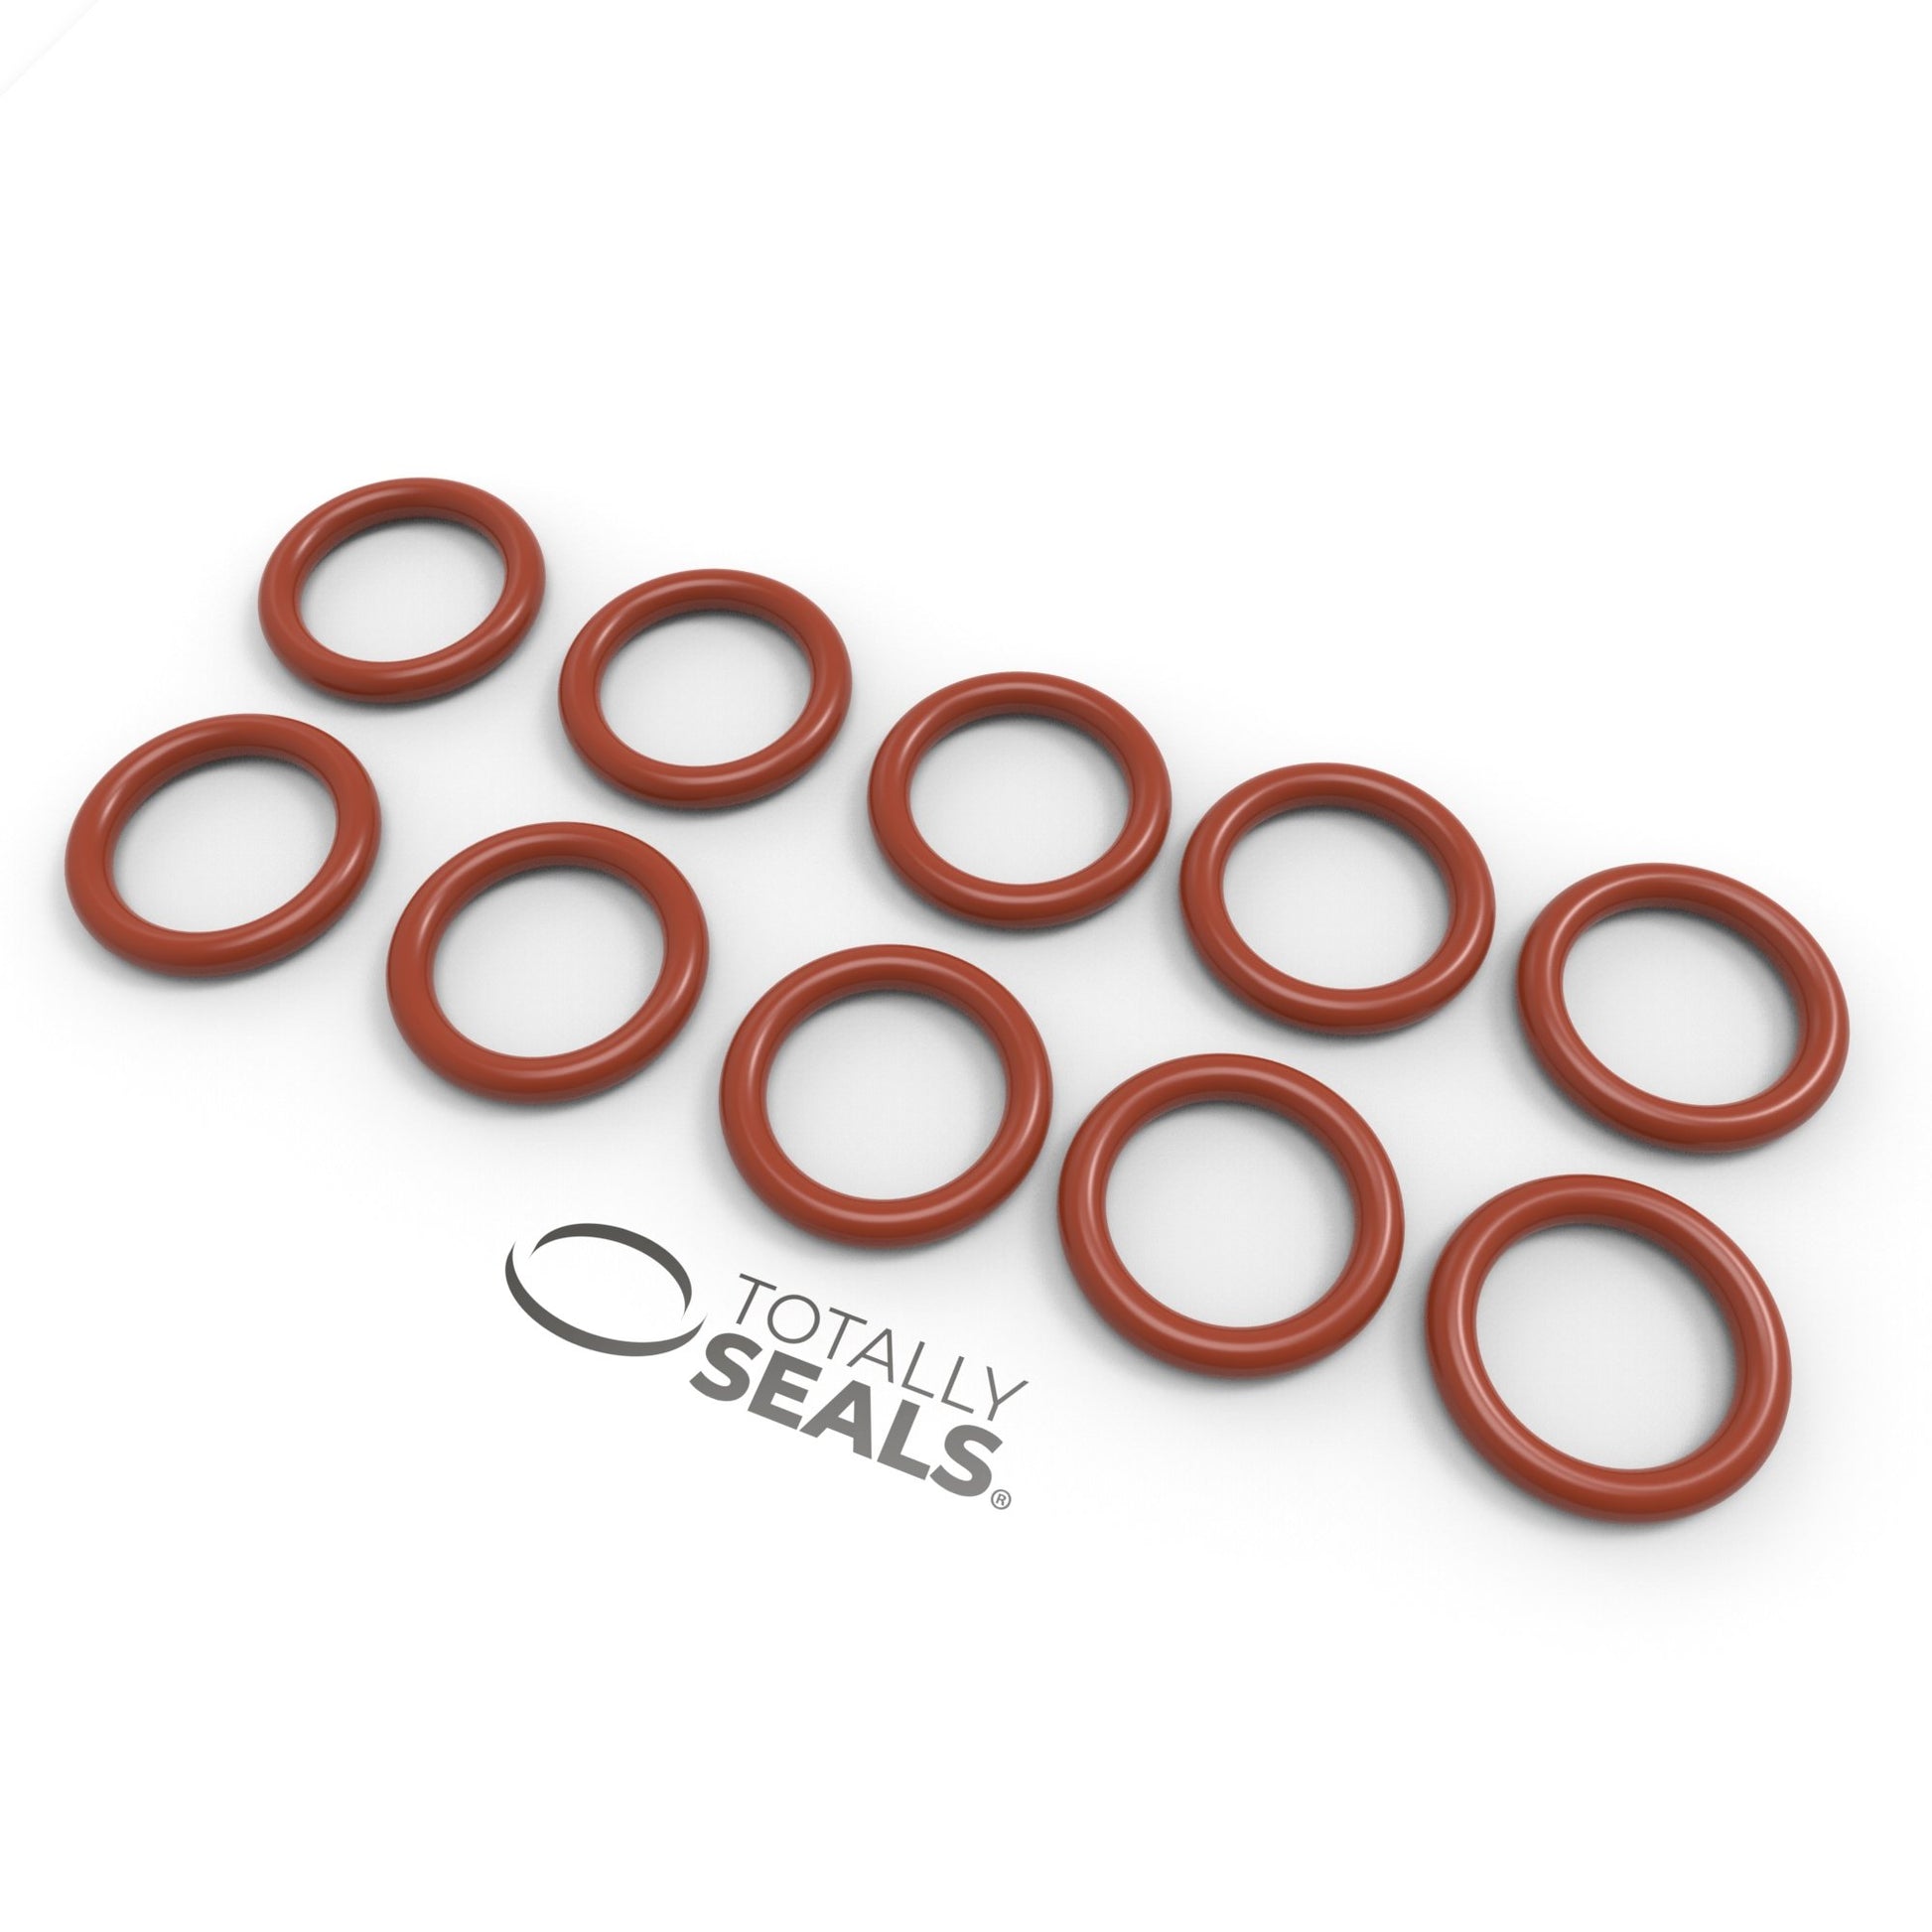 19mm x 2mm (23mm OD) Silicone O-Rings - Totally Seals®